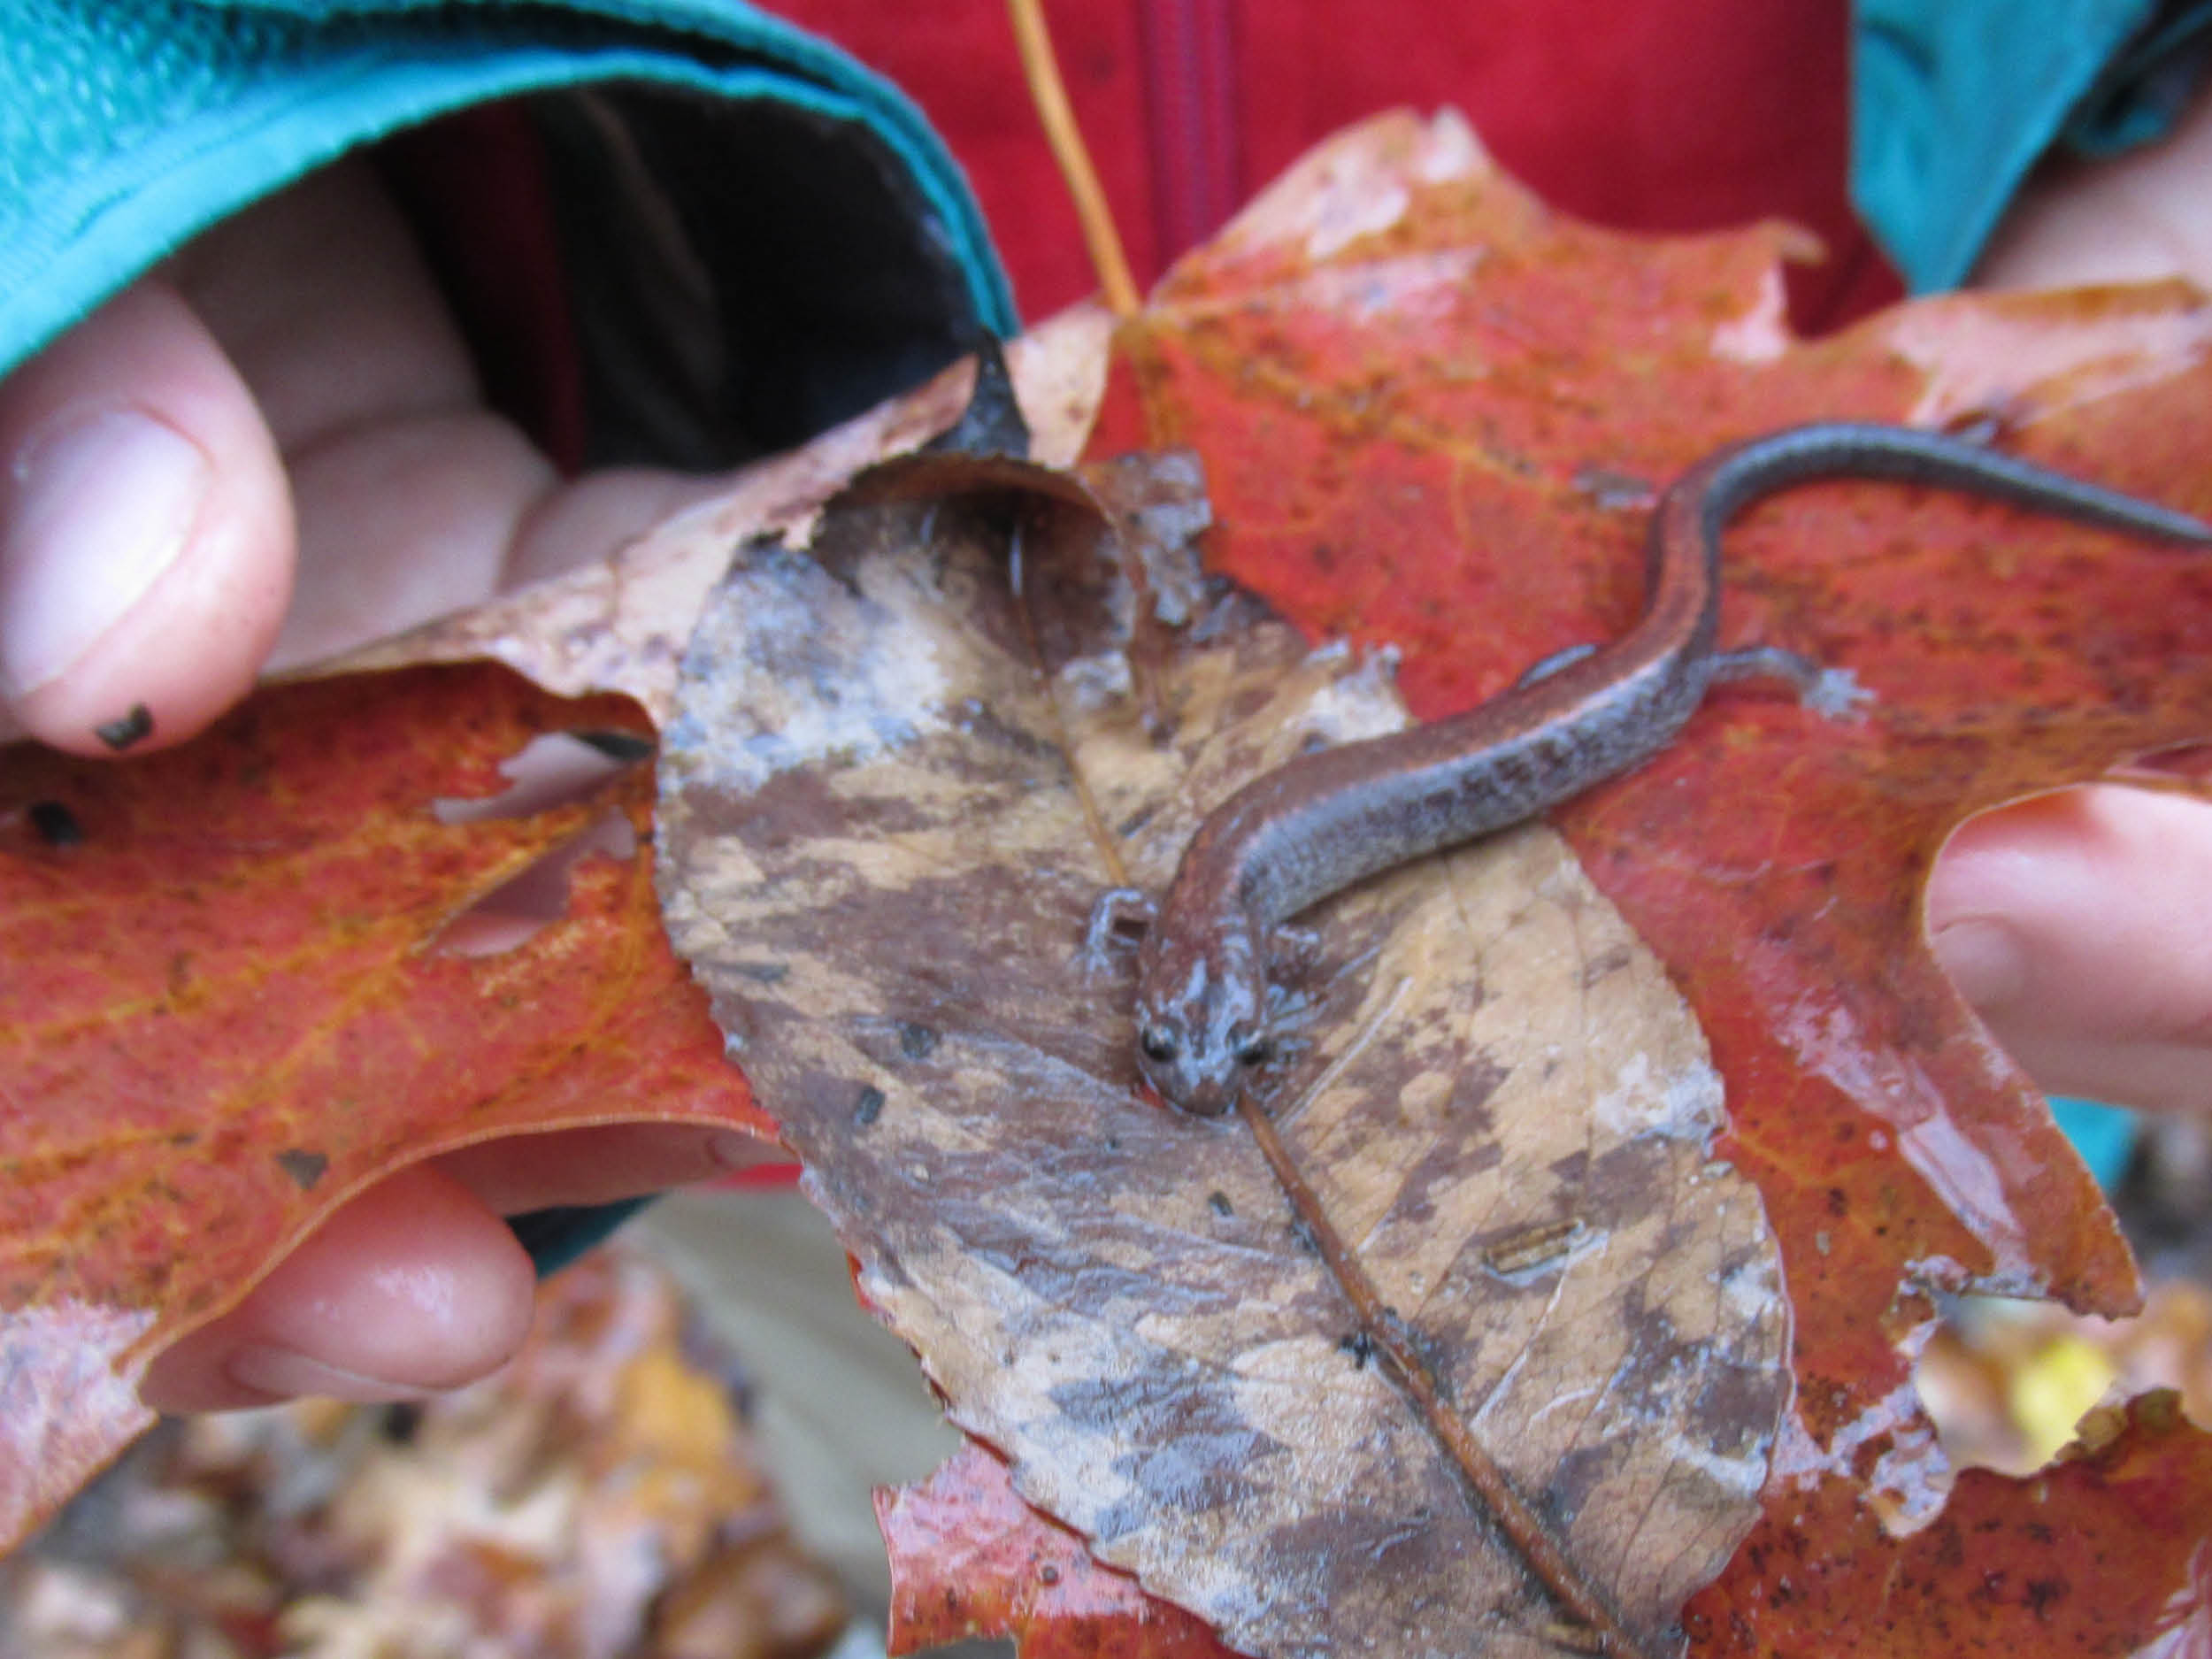 An image of a brown salamander on a red leaf being held by a child's hands.